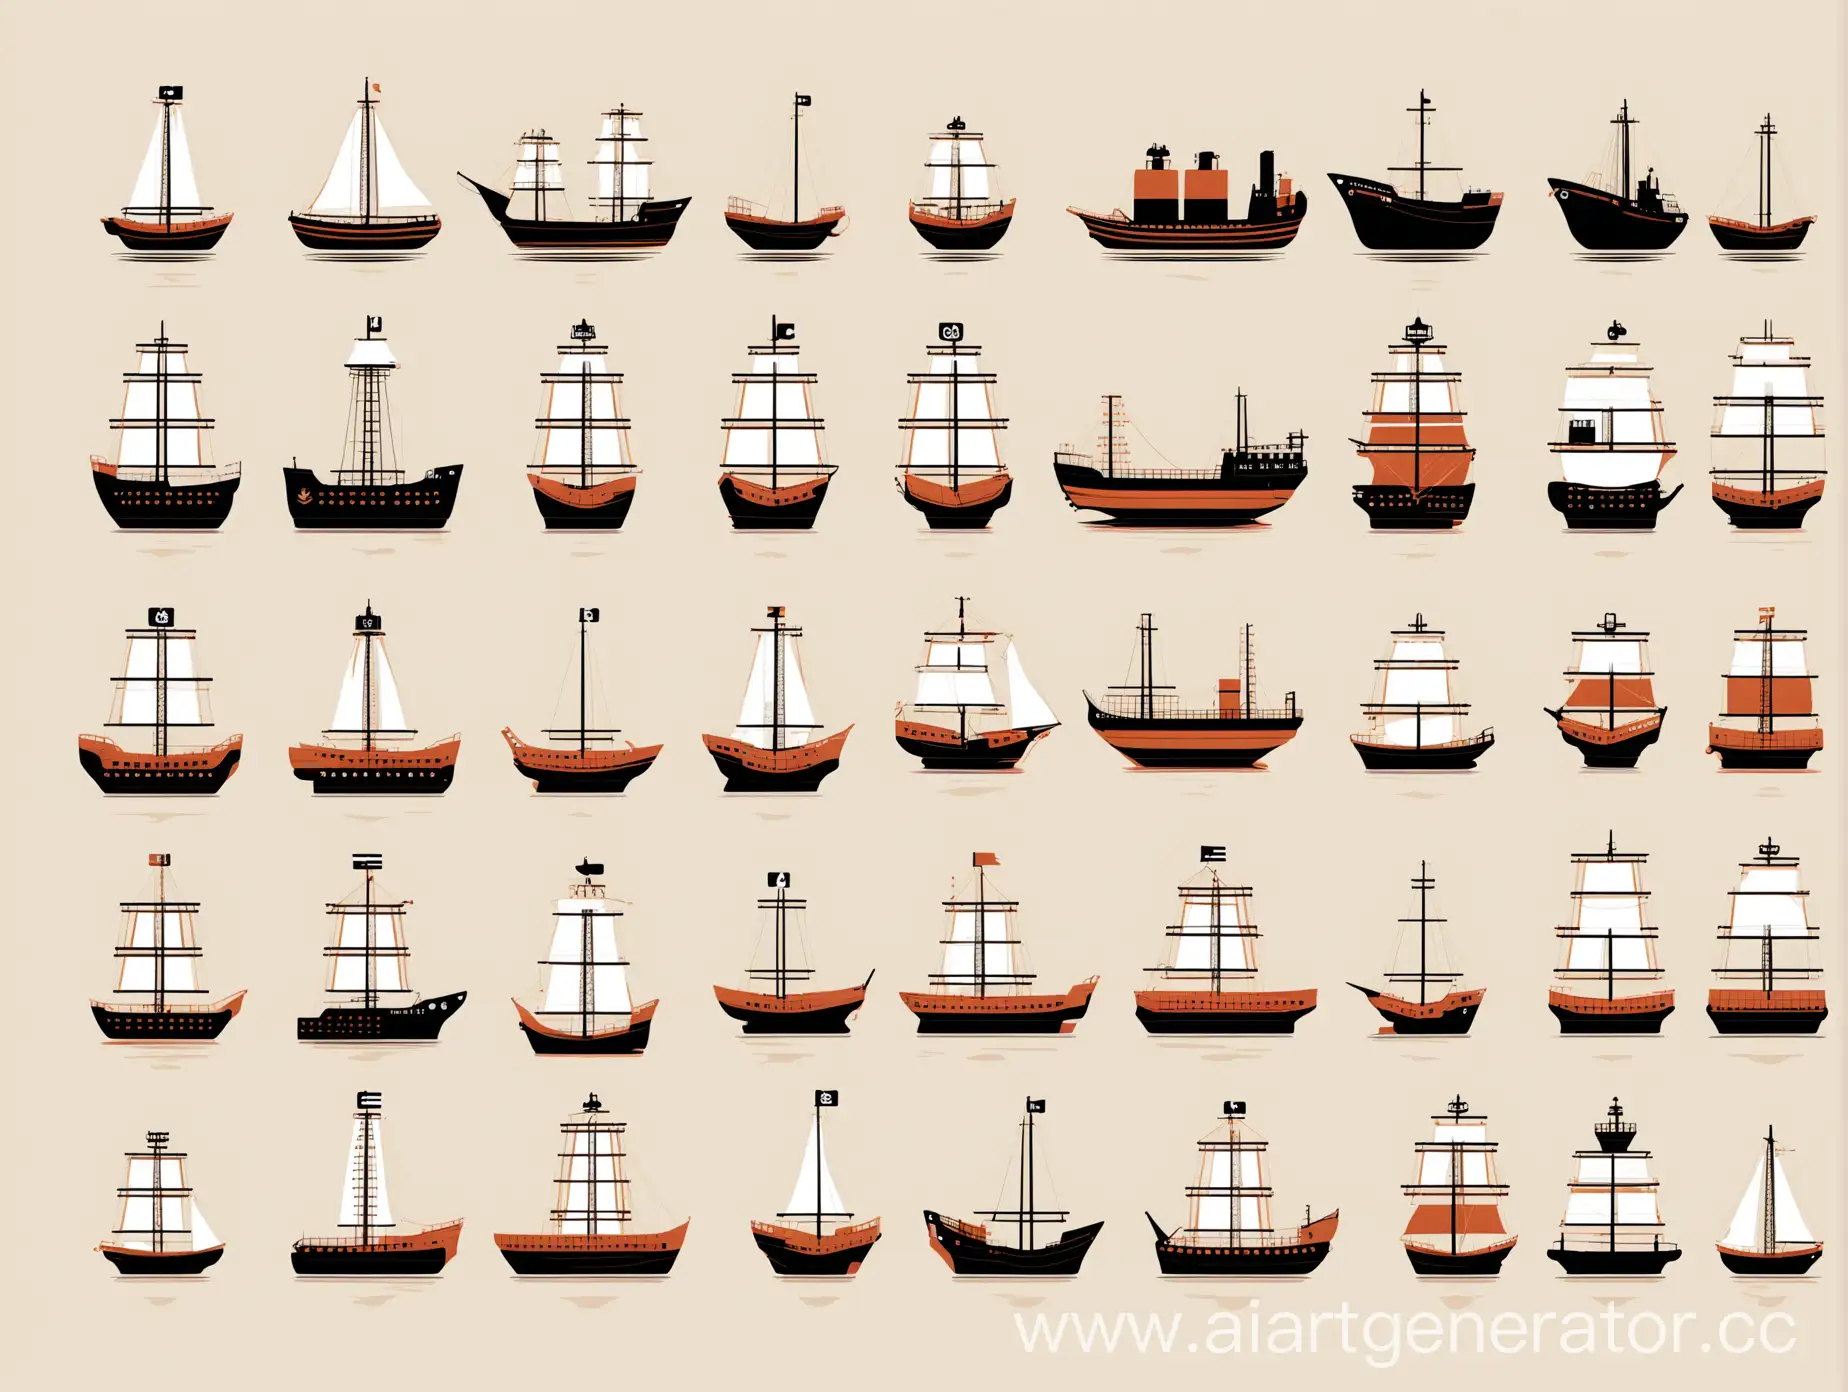 Minimalist-Ship-Icons-Diverse-Vessel-Variants-in-Infographic-Style